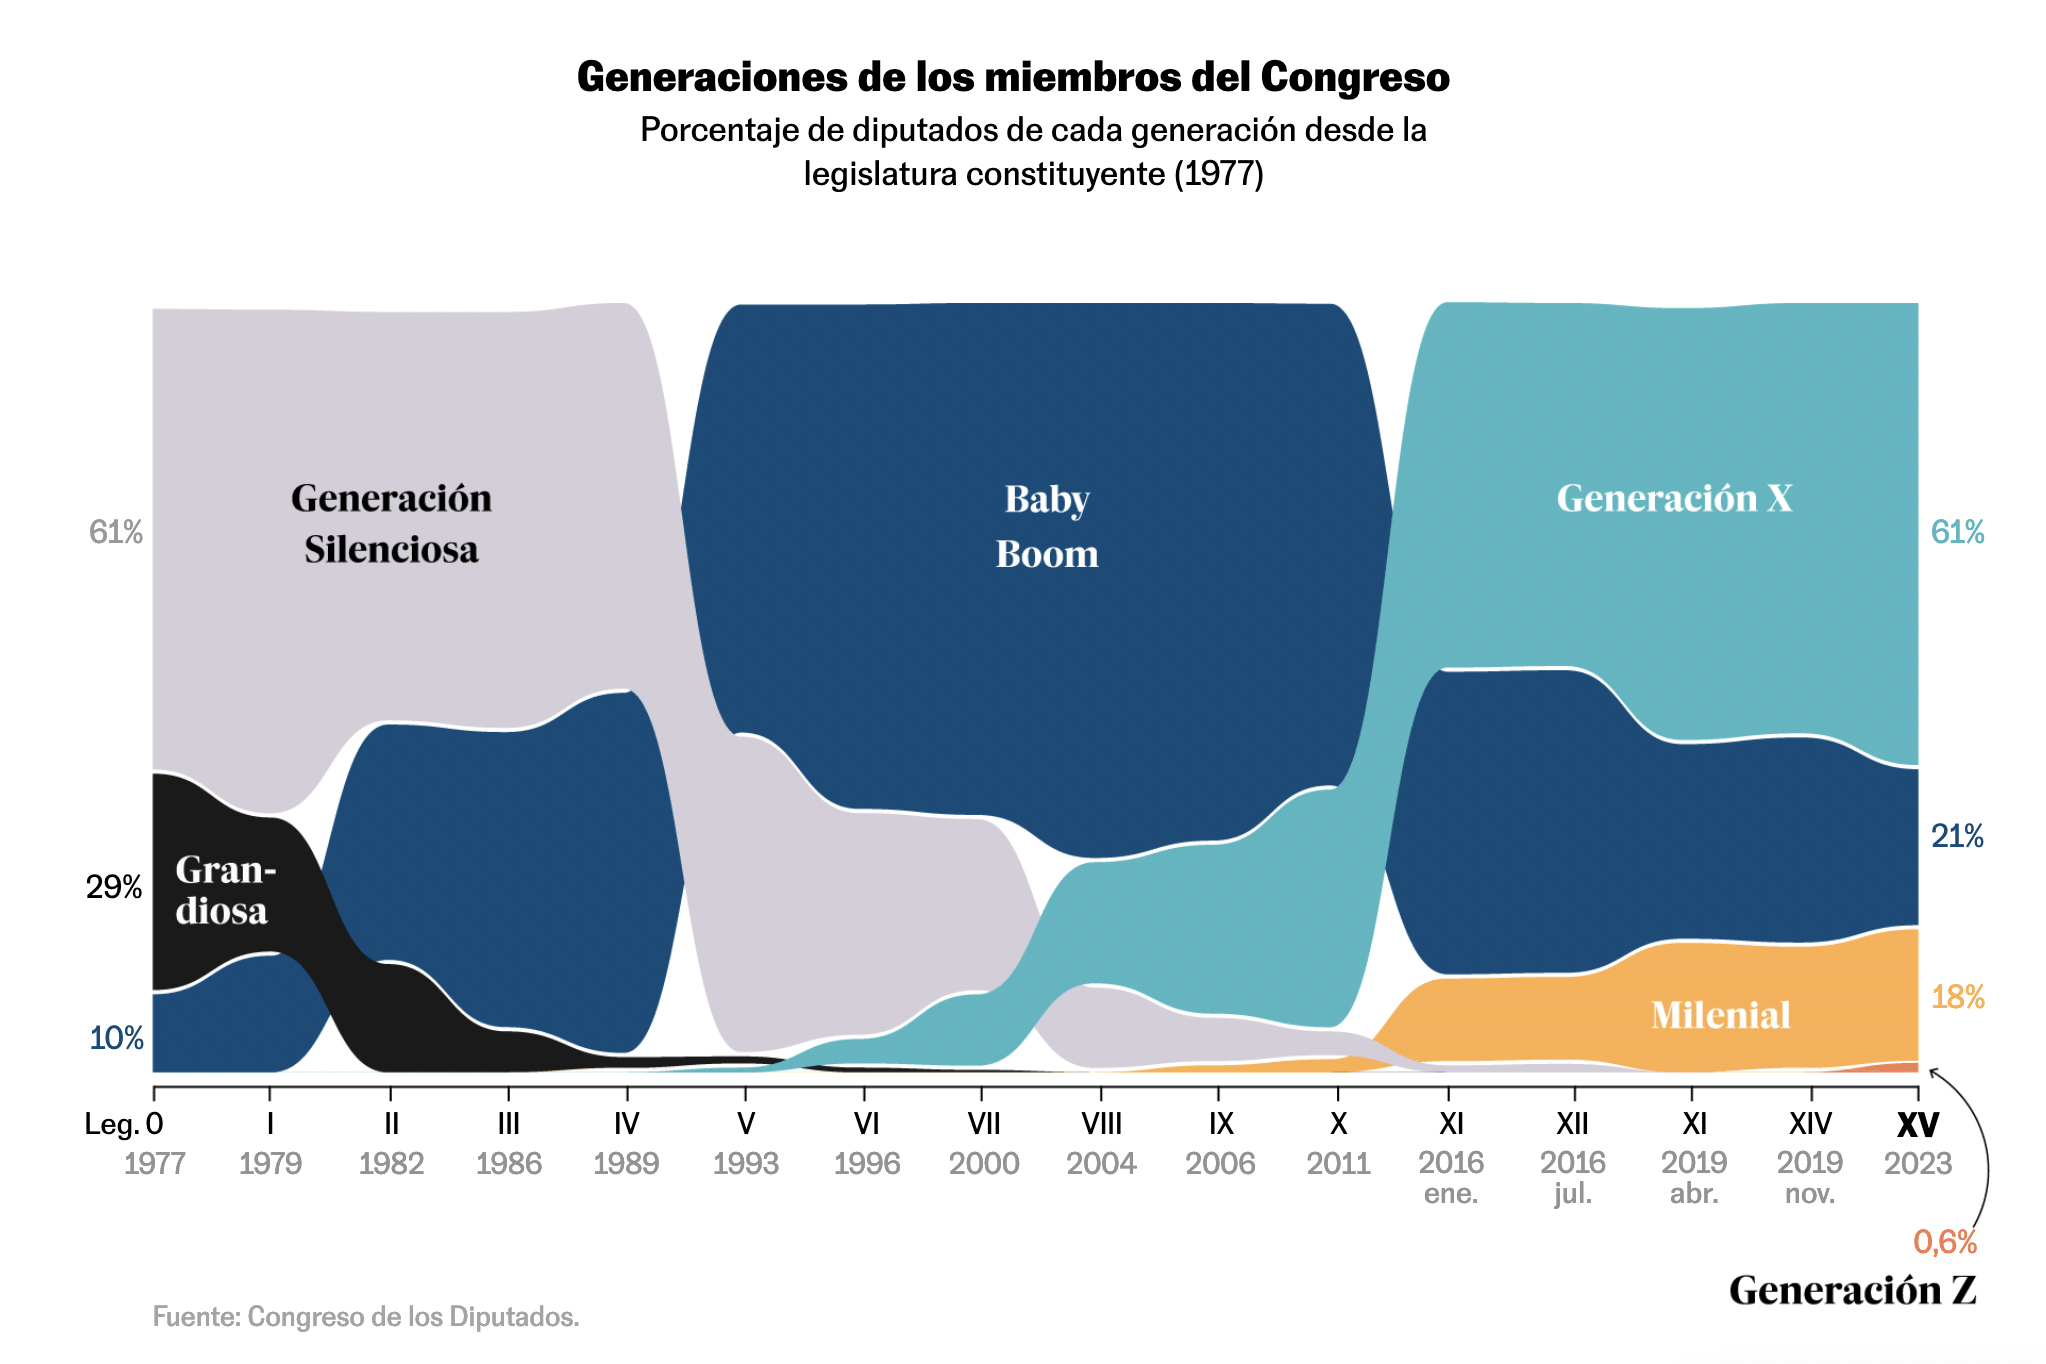 Age of members of Spanish Congress